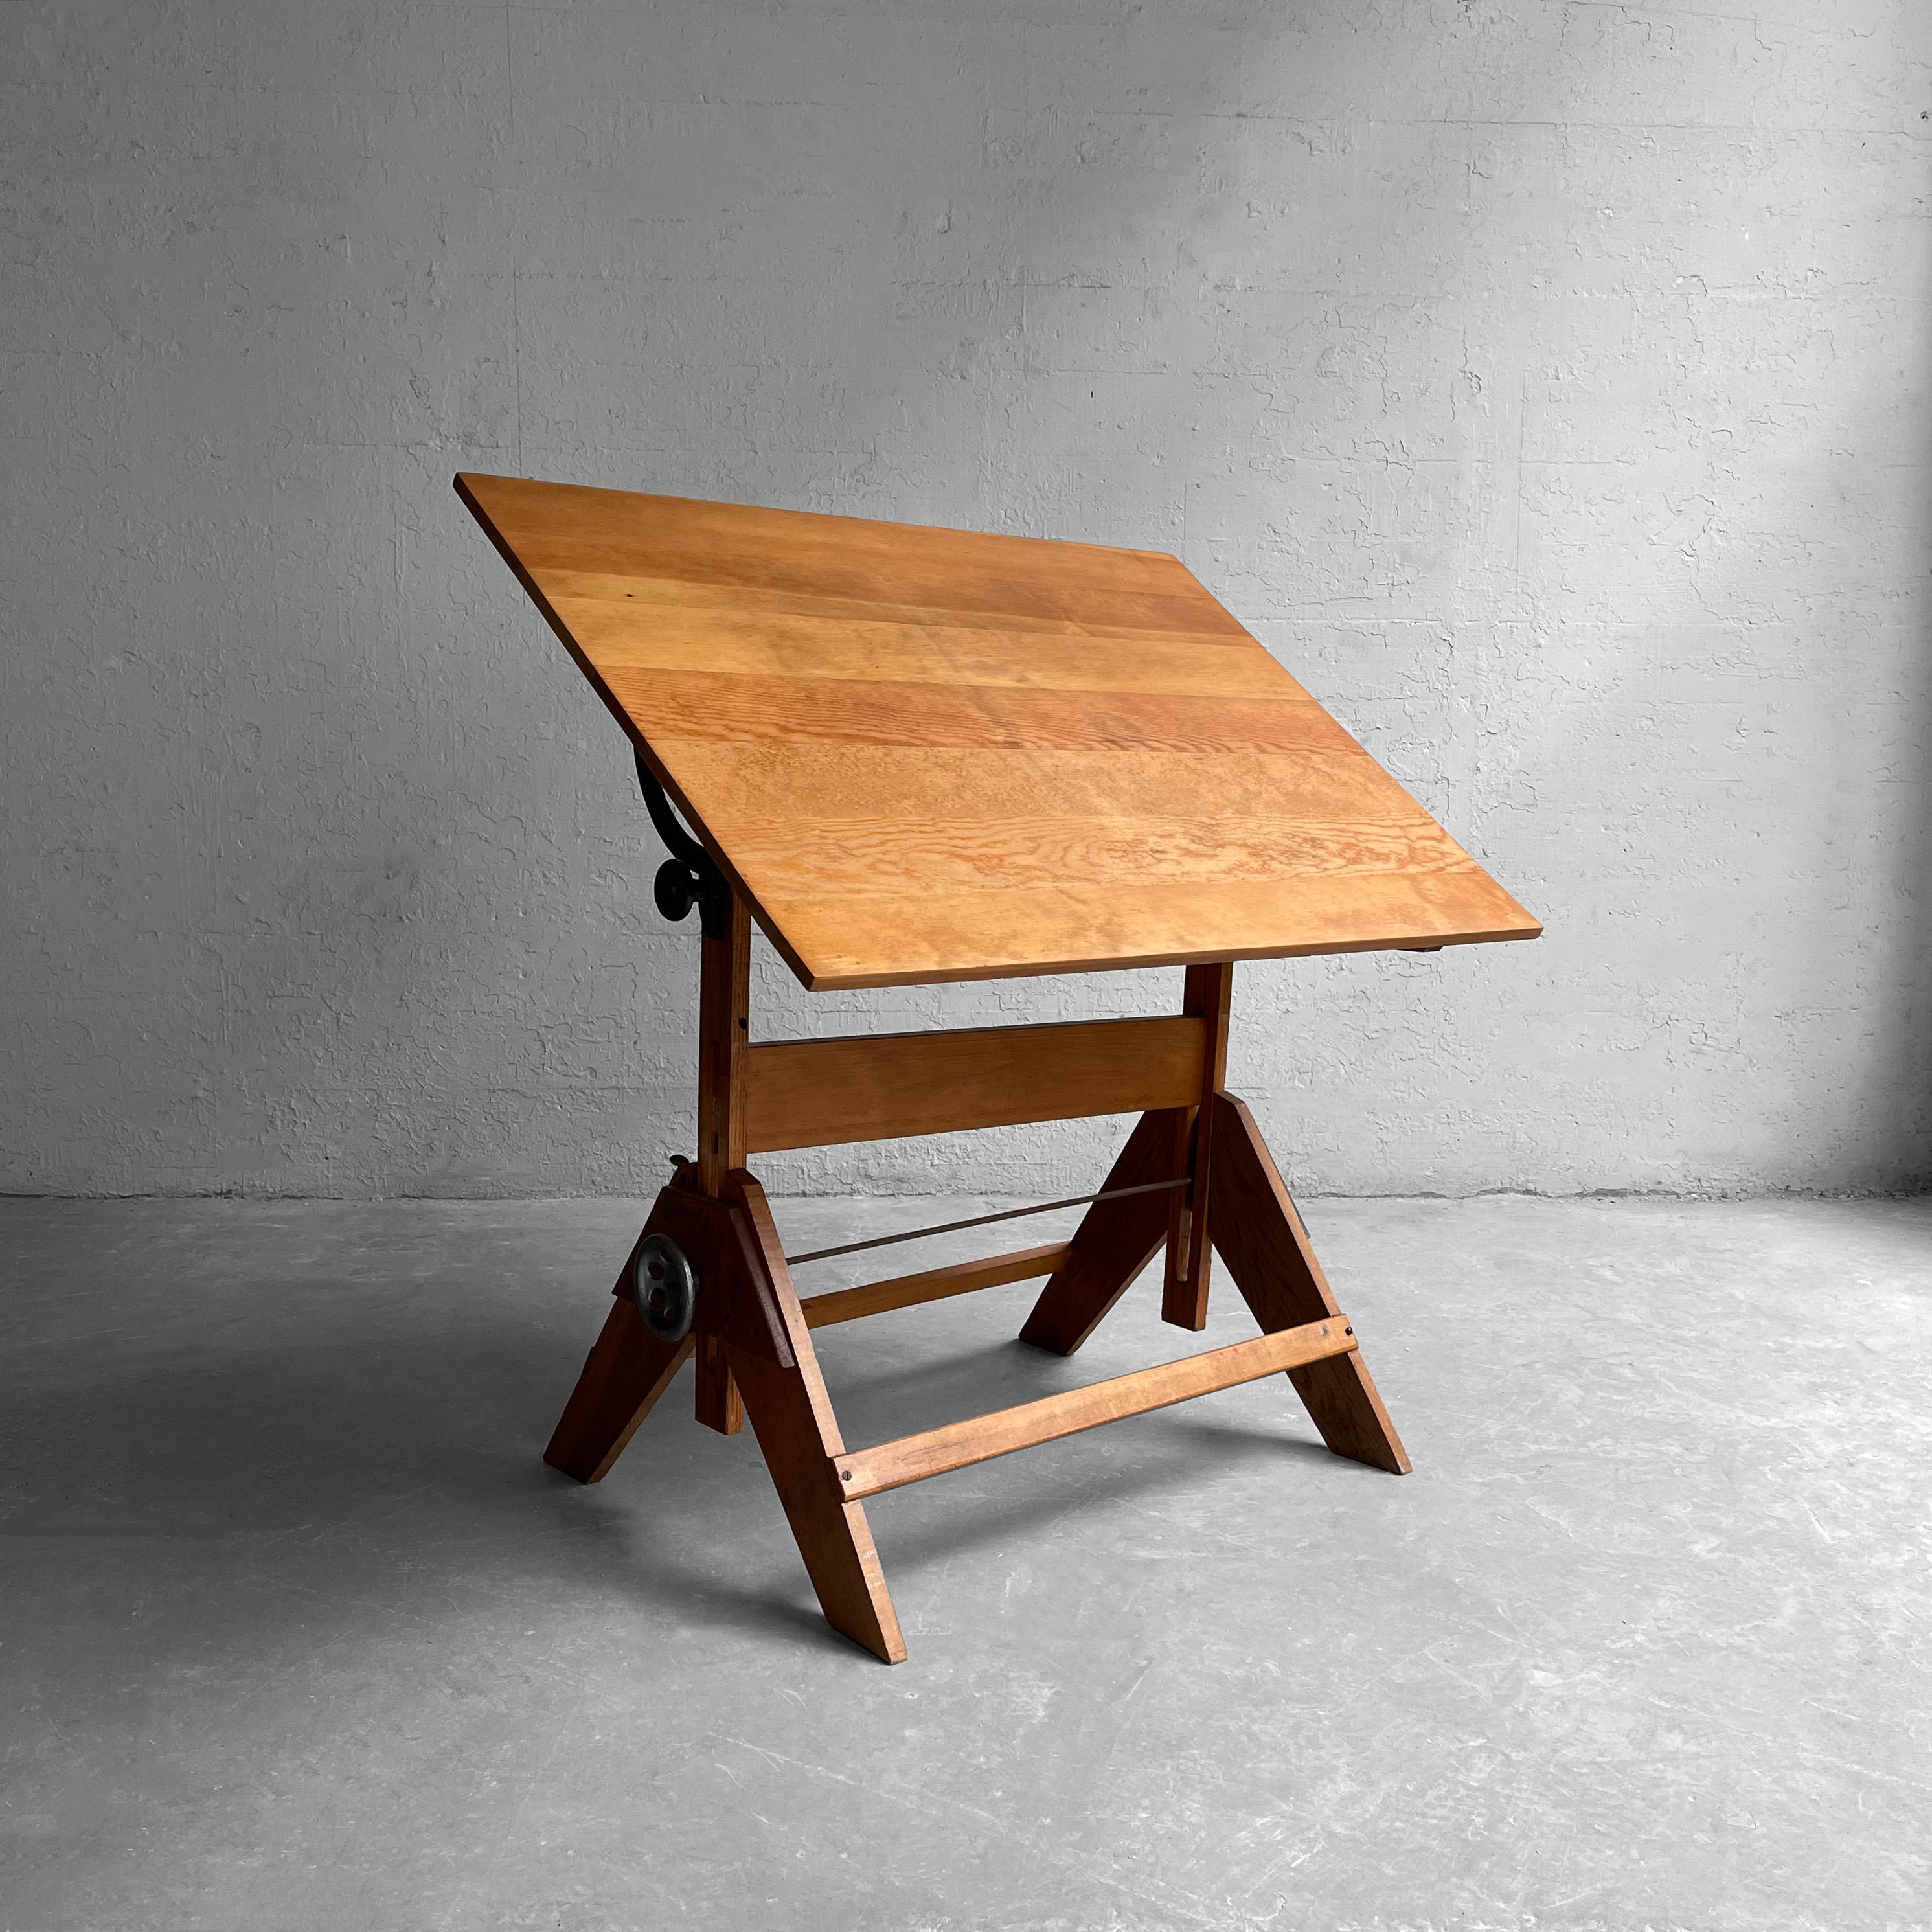 Early 20th century, industrial, drafting table features a maple base with pine top and cast iron hardware. The table's height is adjustable from 31-40 inches. The top rotates vertical on both sides and can be set at level horizontal.